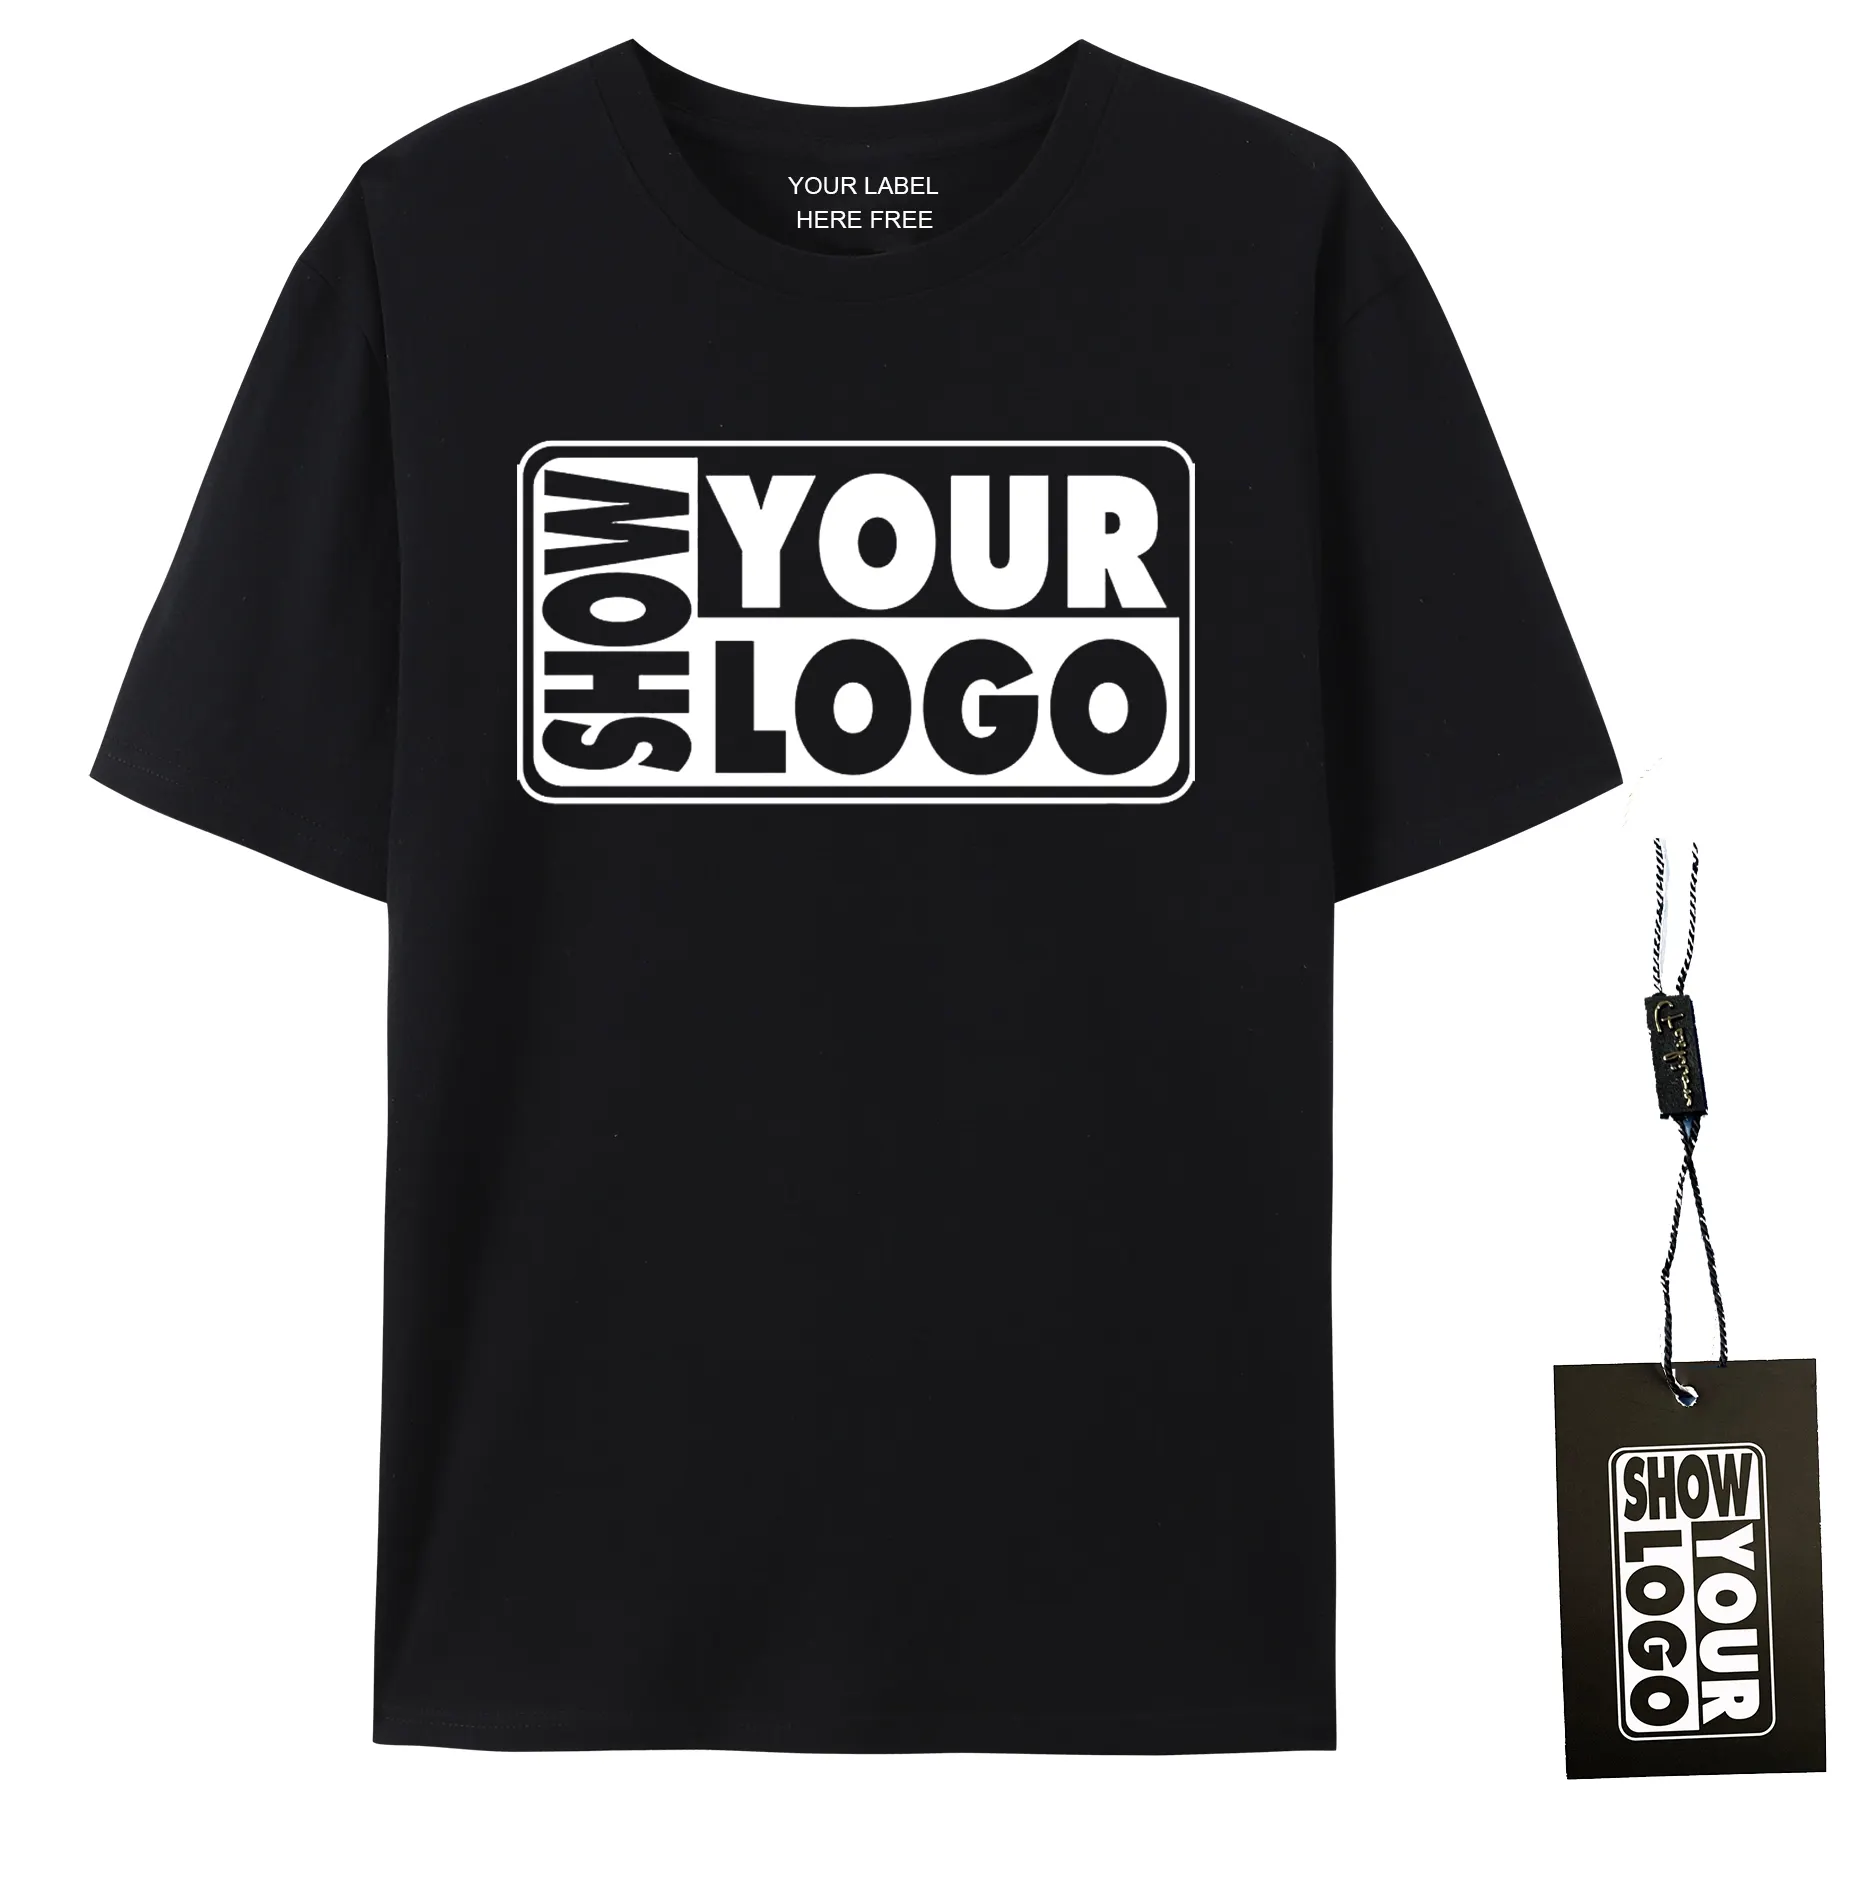 Free label printing free cards with your logo 190gsm 100% cotton custom men's t-shirts